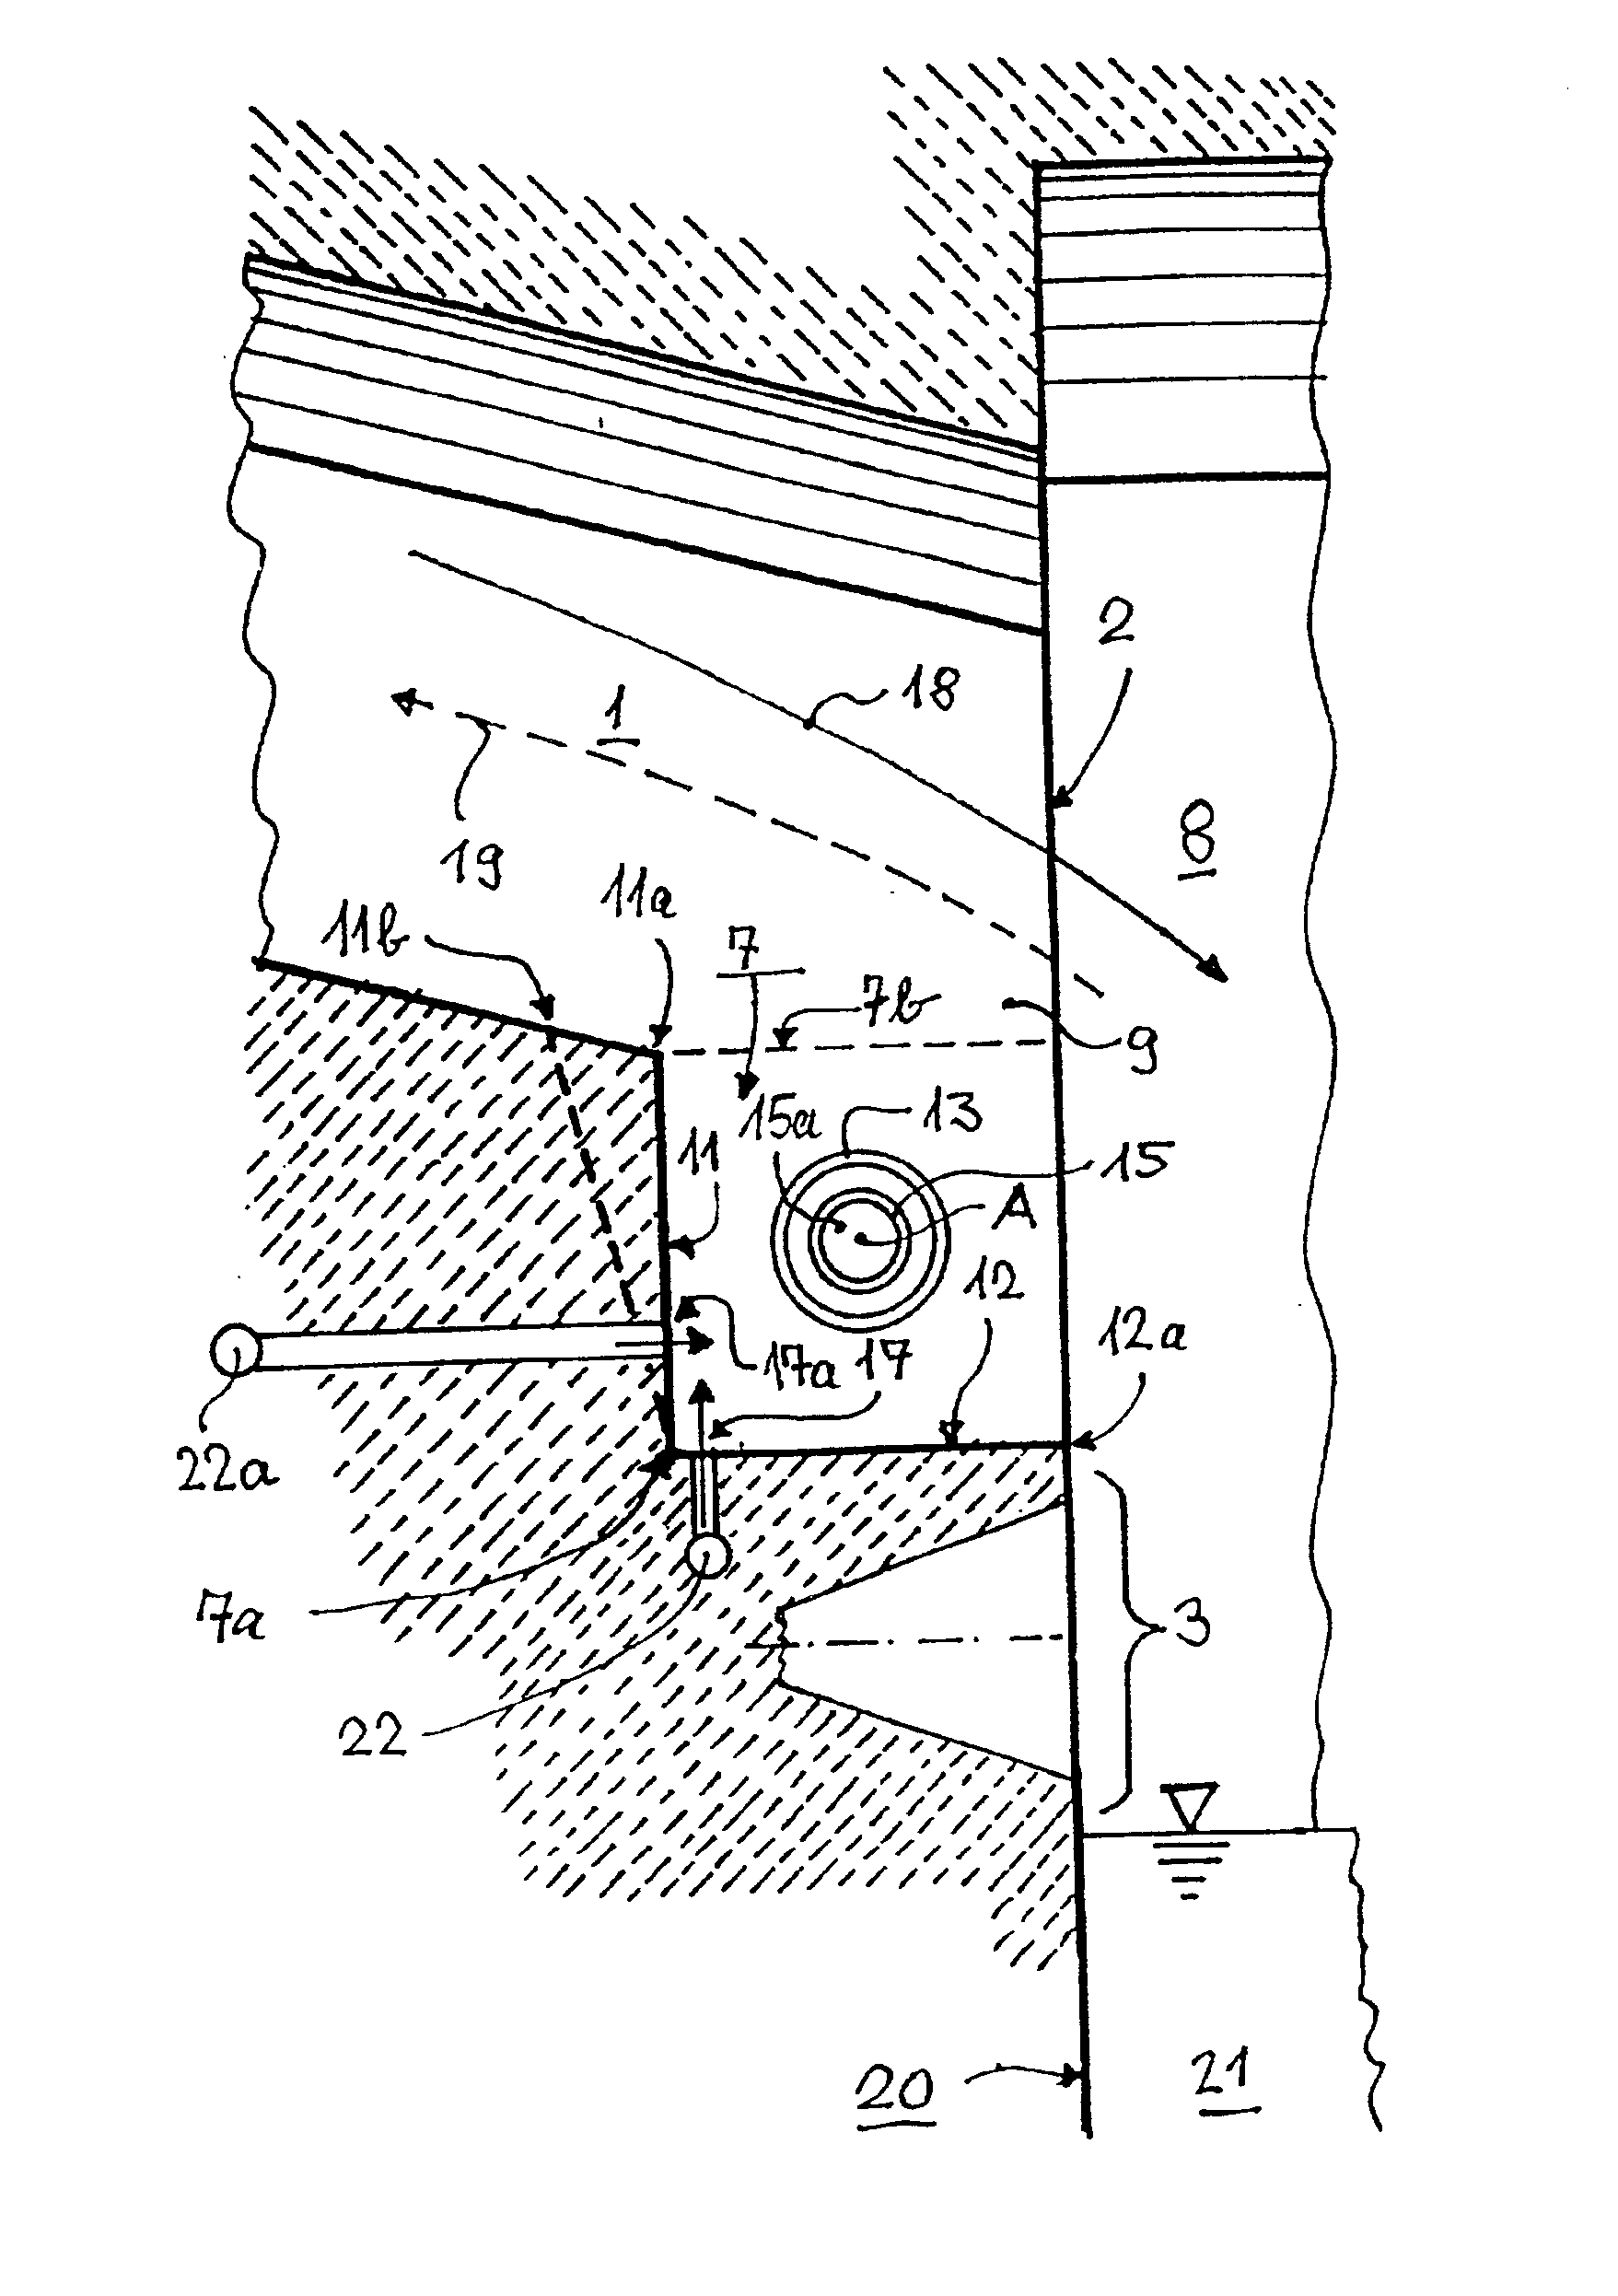 Method and apparatus for heating glass melting furnaces with fossil fuels